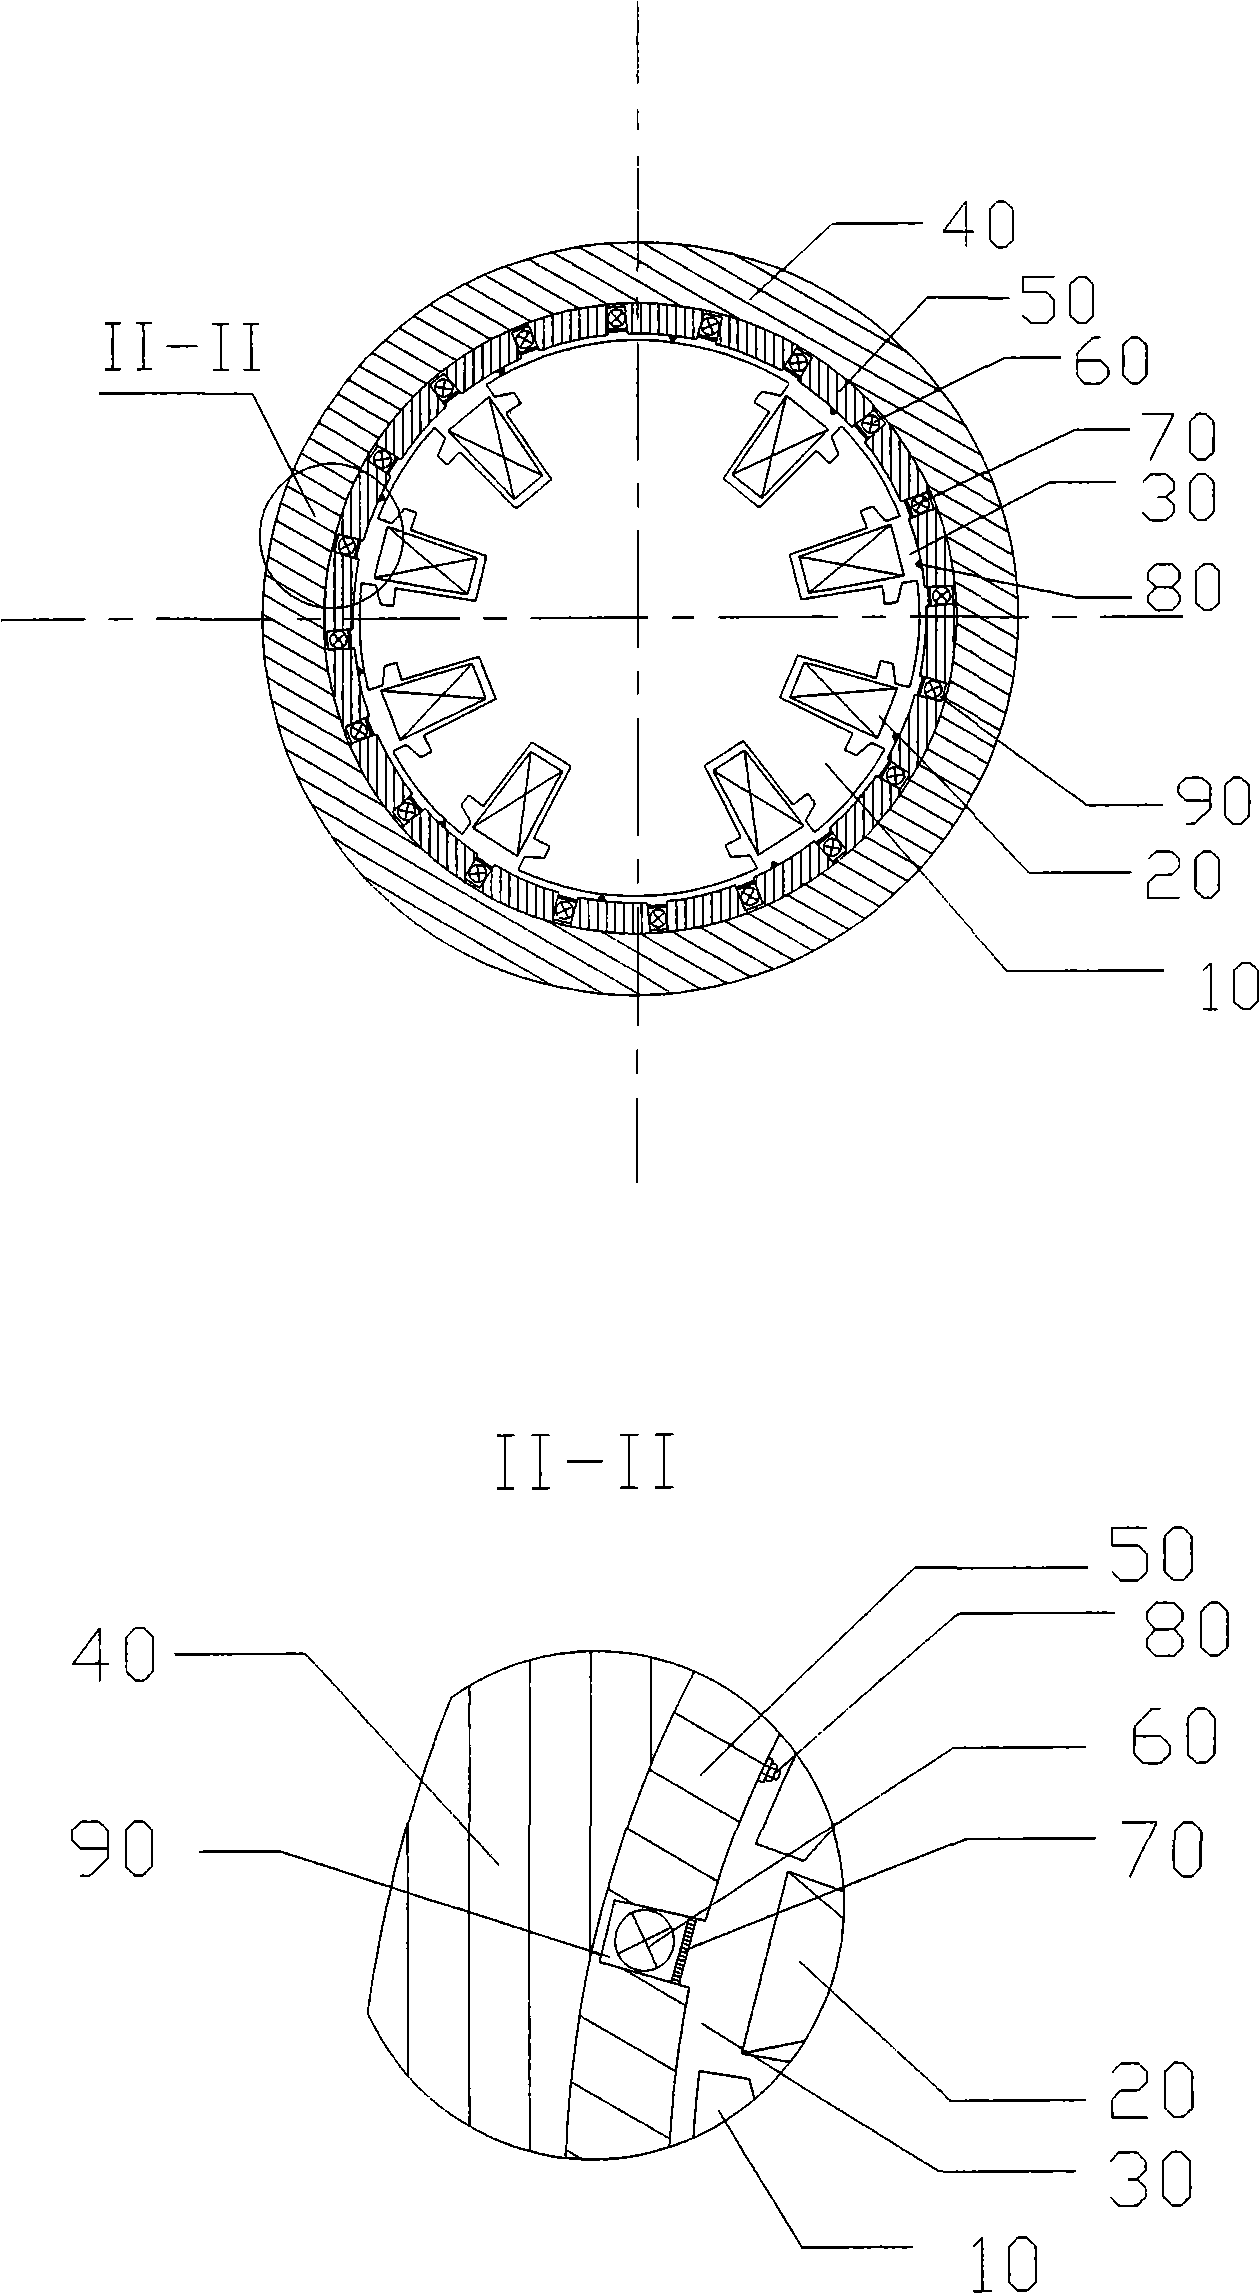 Non-groove stator of evaporative cooling motor